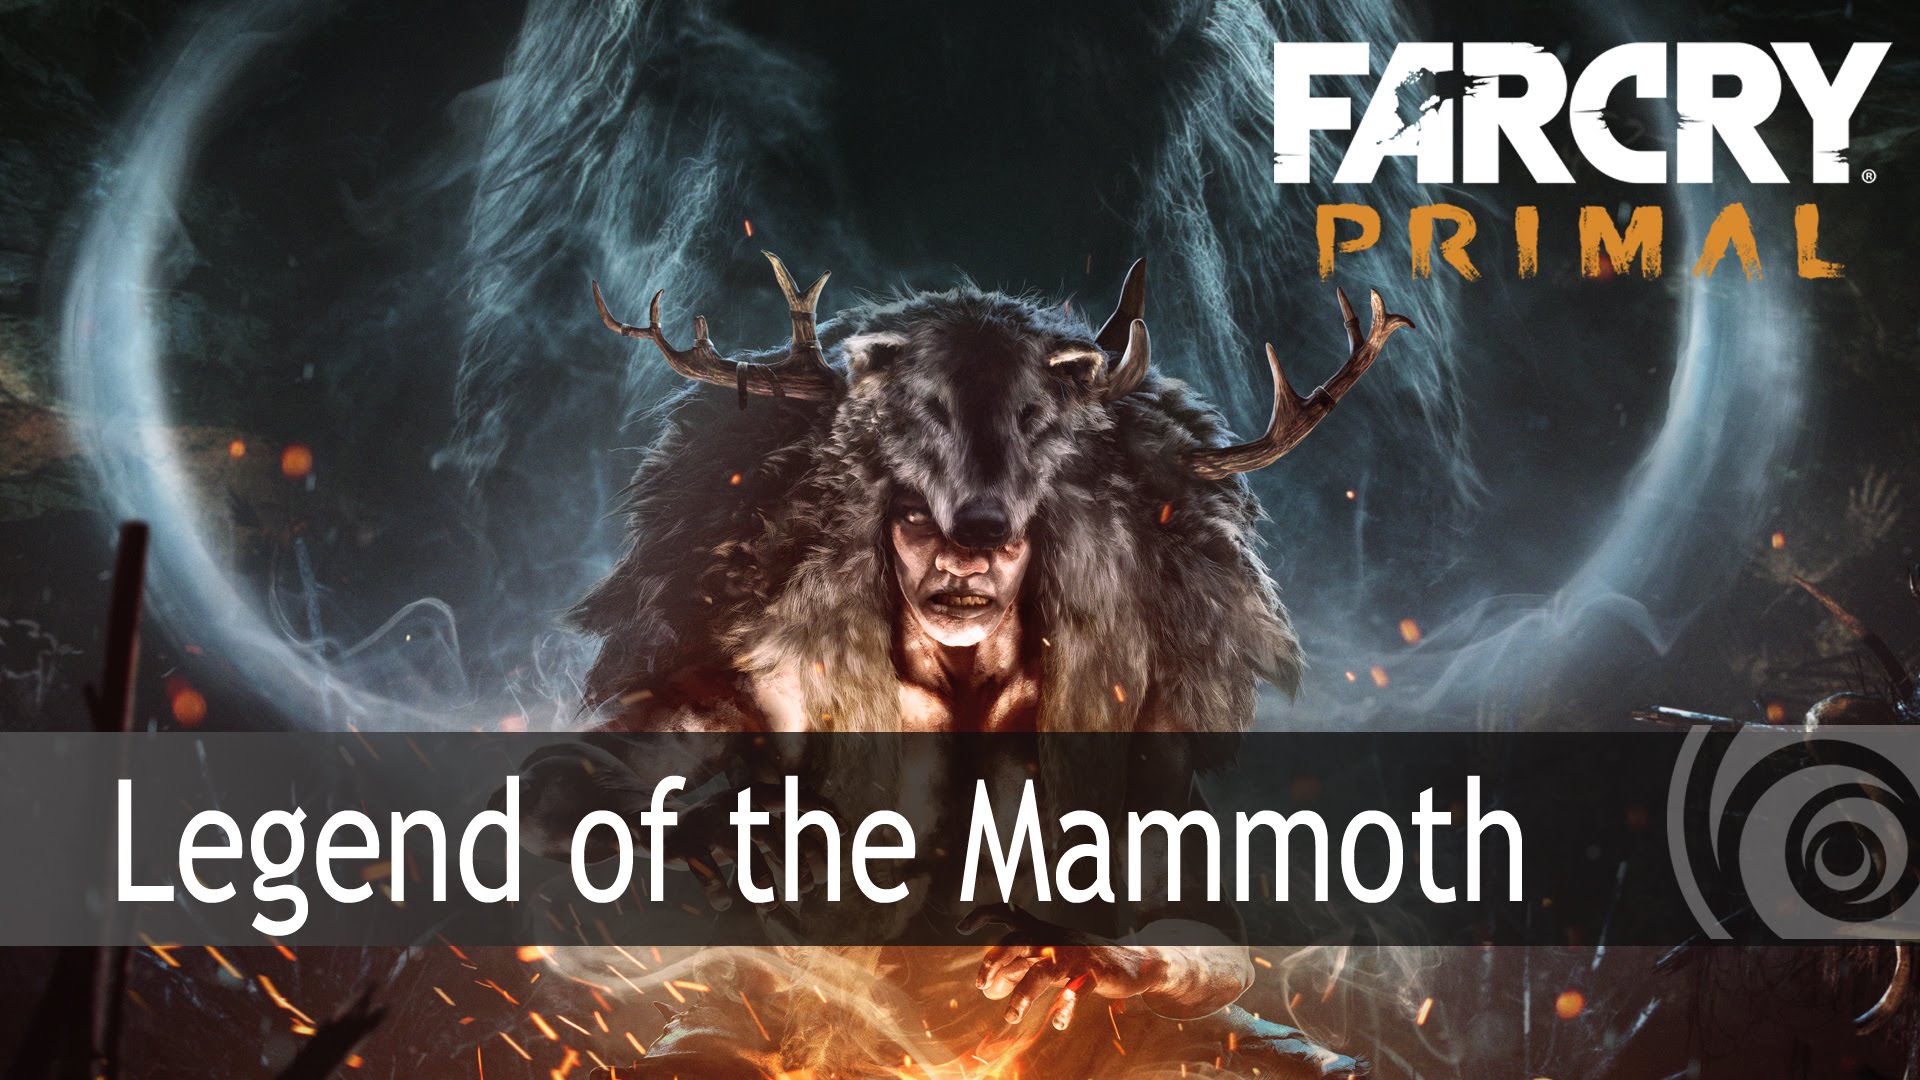 Far Cry Primal – Legend of the Mammoth Trailer